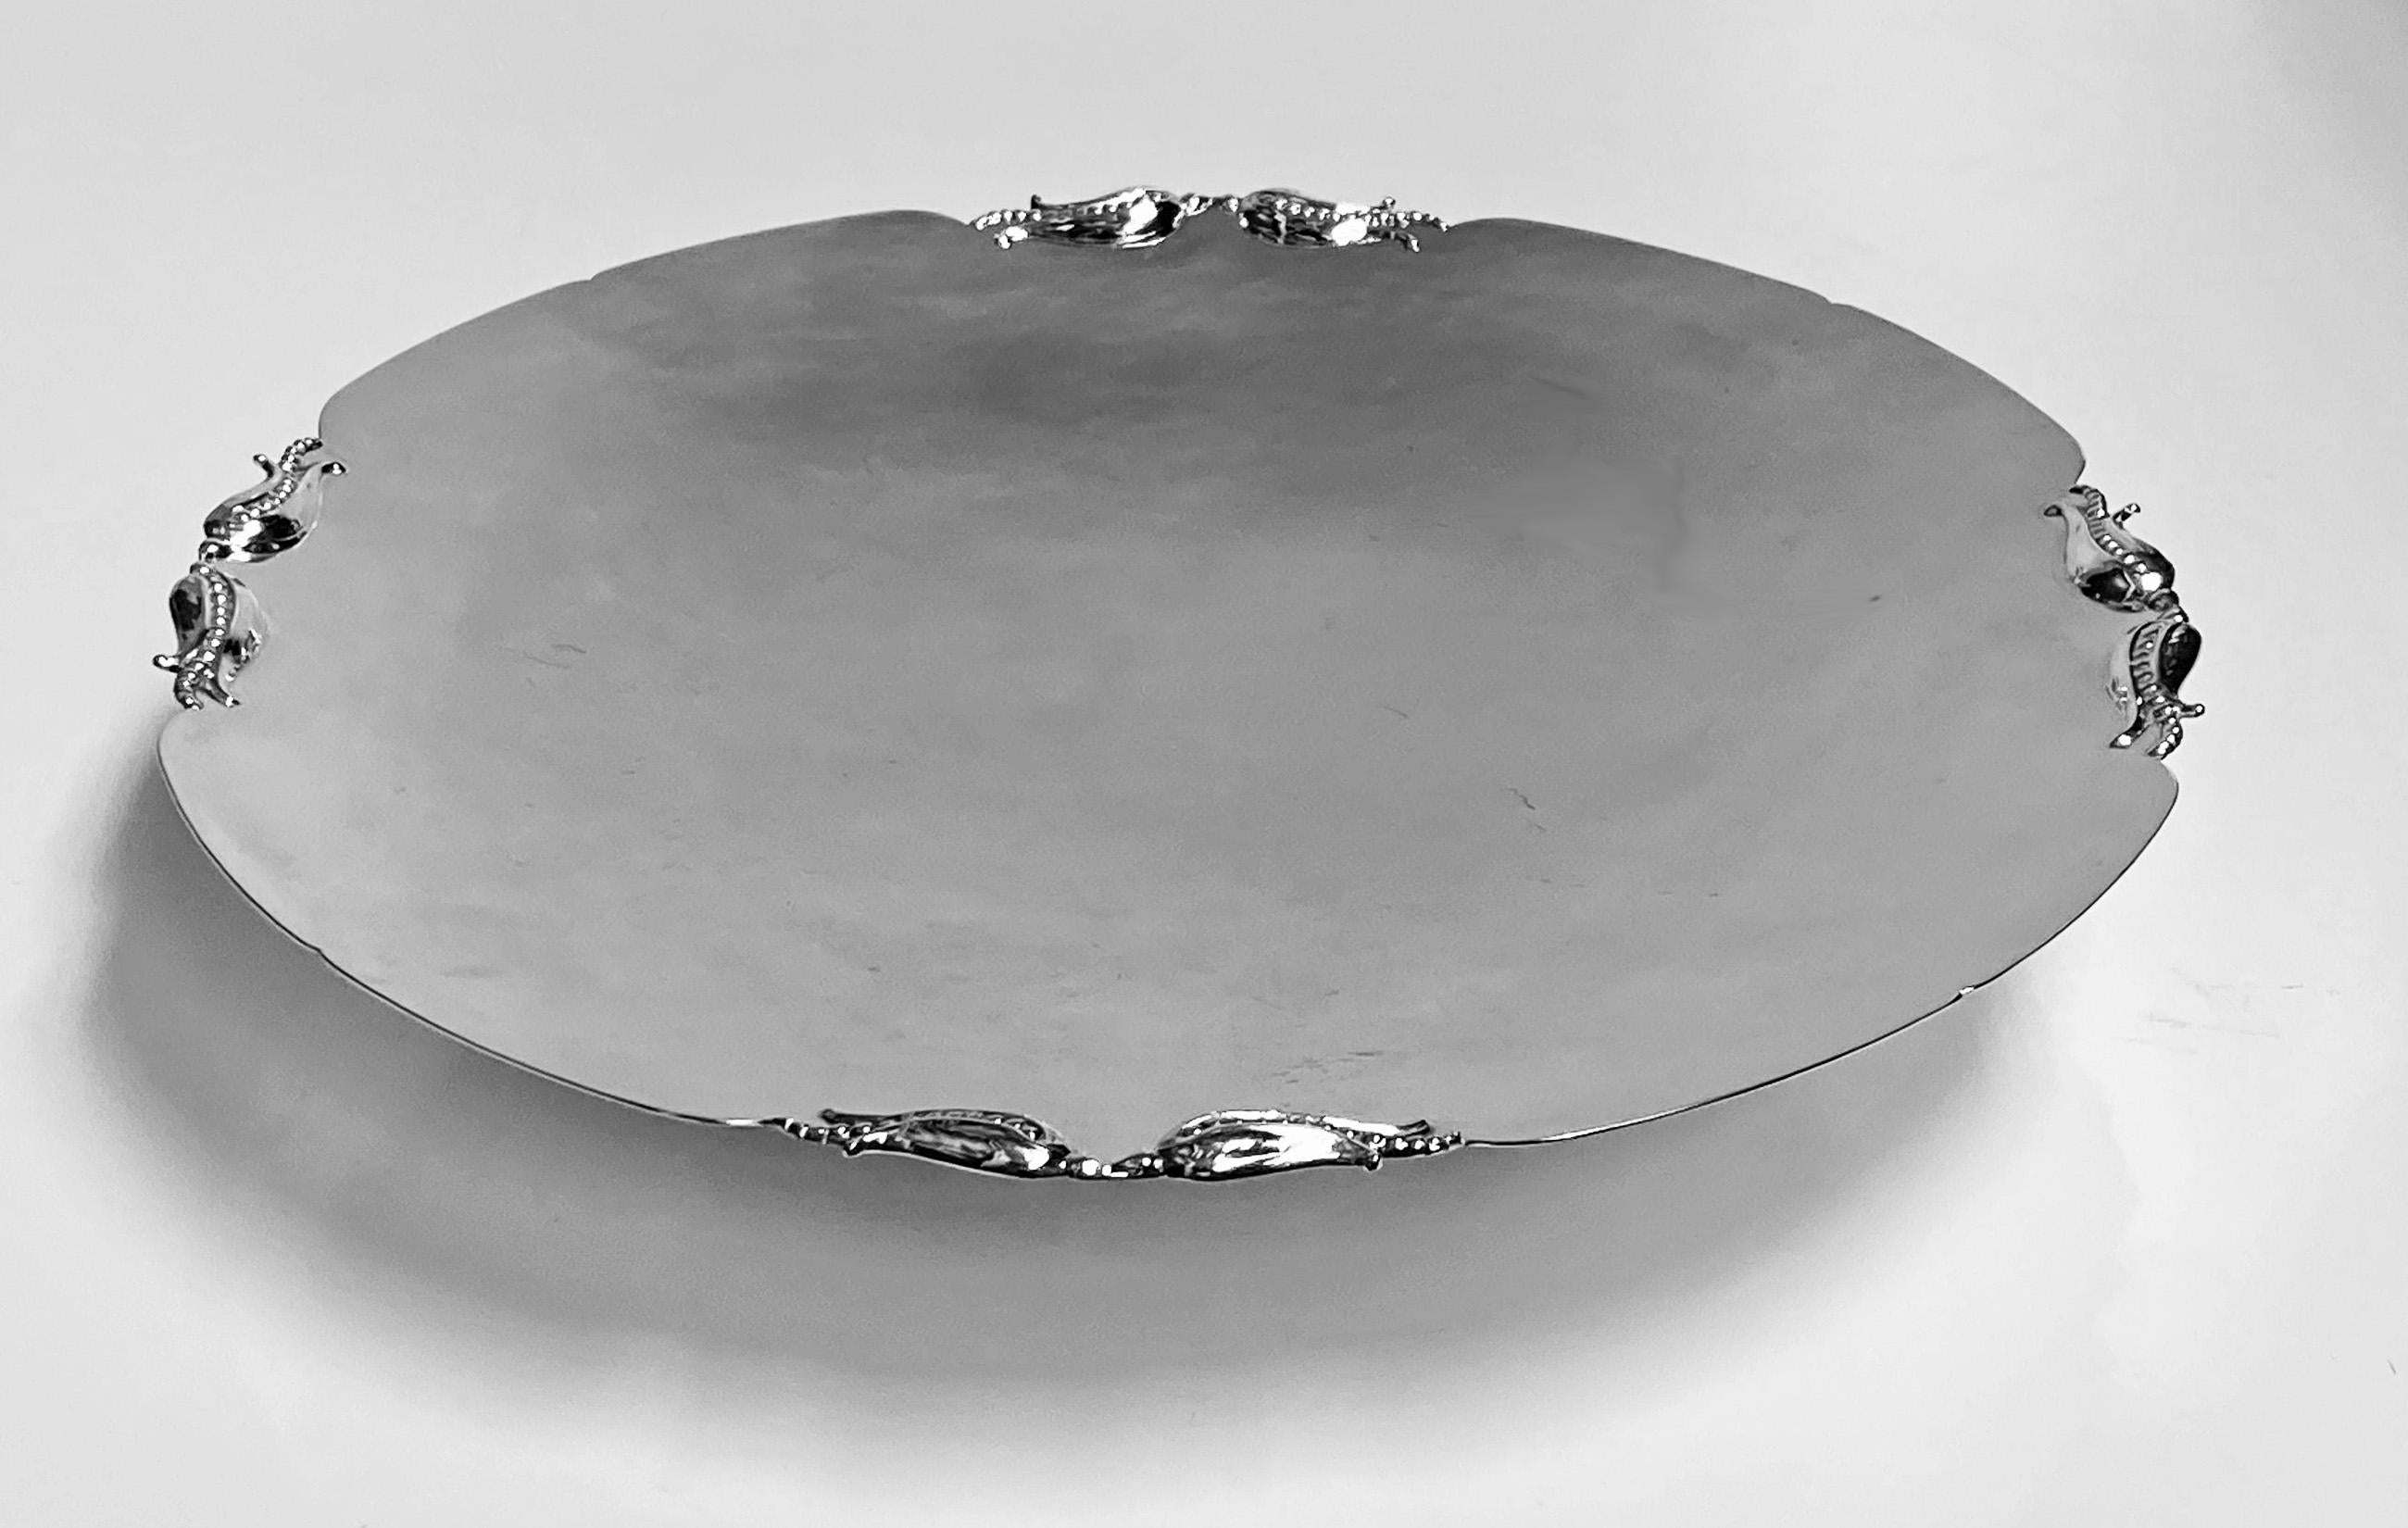 Sterling silver Tazza dish, Carl Poul Petersen Montreal, circa 1940. Plain on pedestal base, slightly scalloped with corn husk intervals. Measures: Diameter 10 inches, height 1.75 inches. Weight: 419 grams. (13.47 oz). Very good condition. Petersen